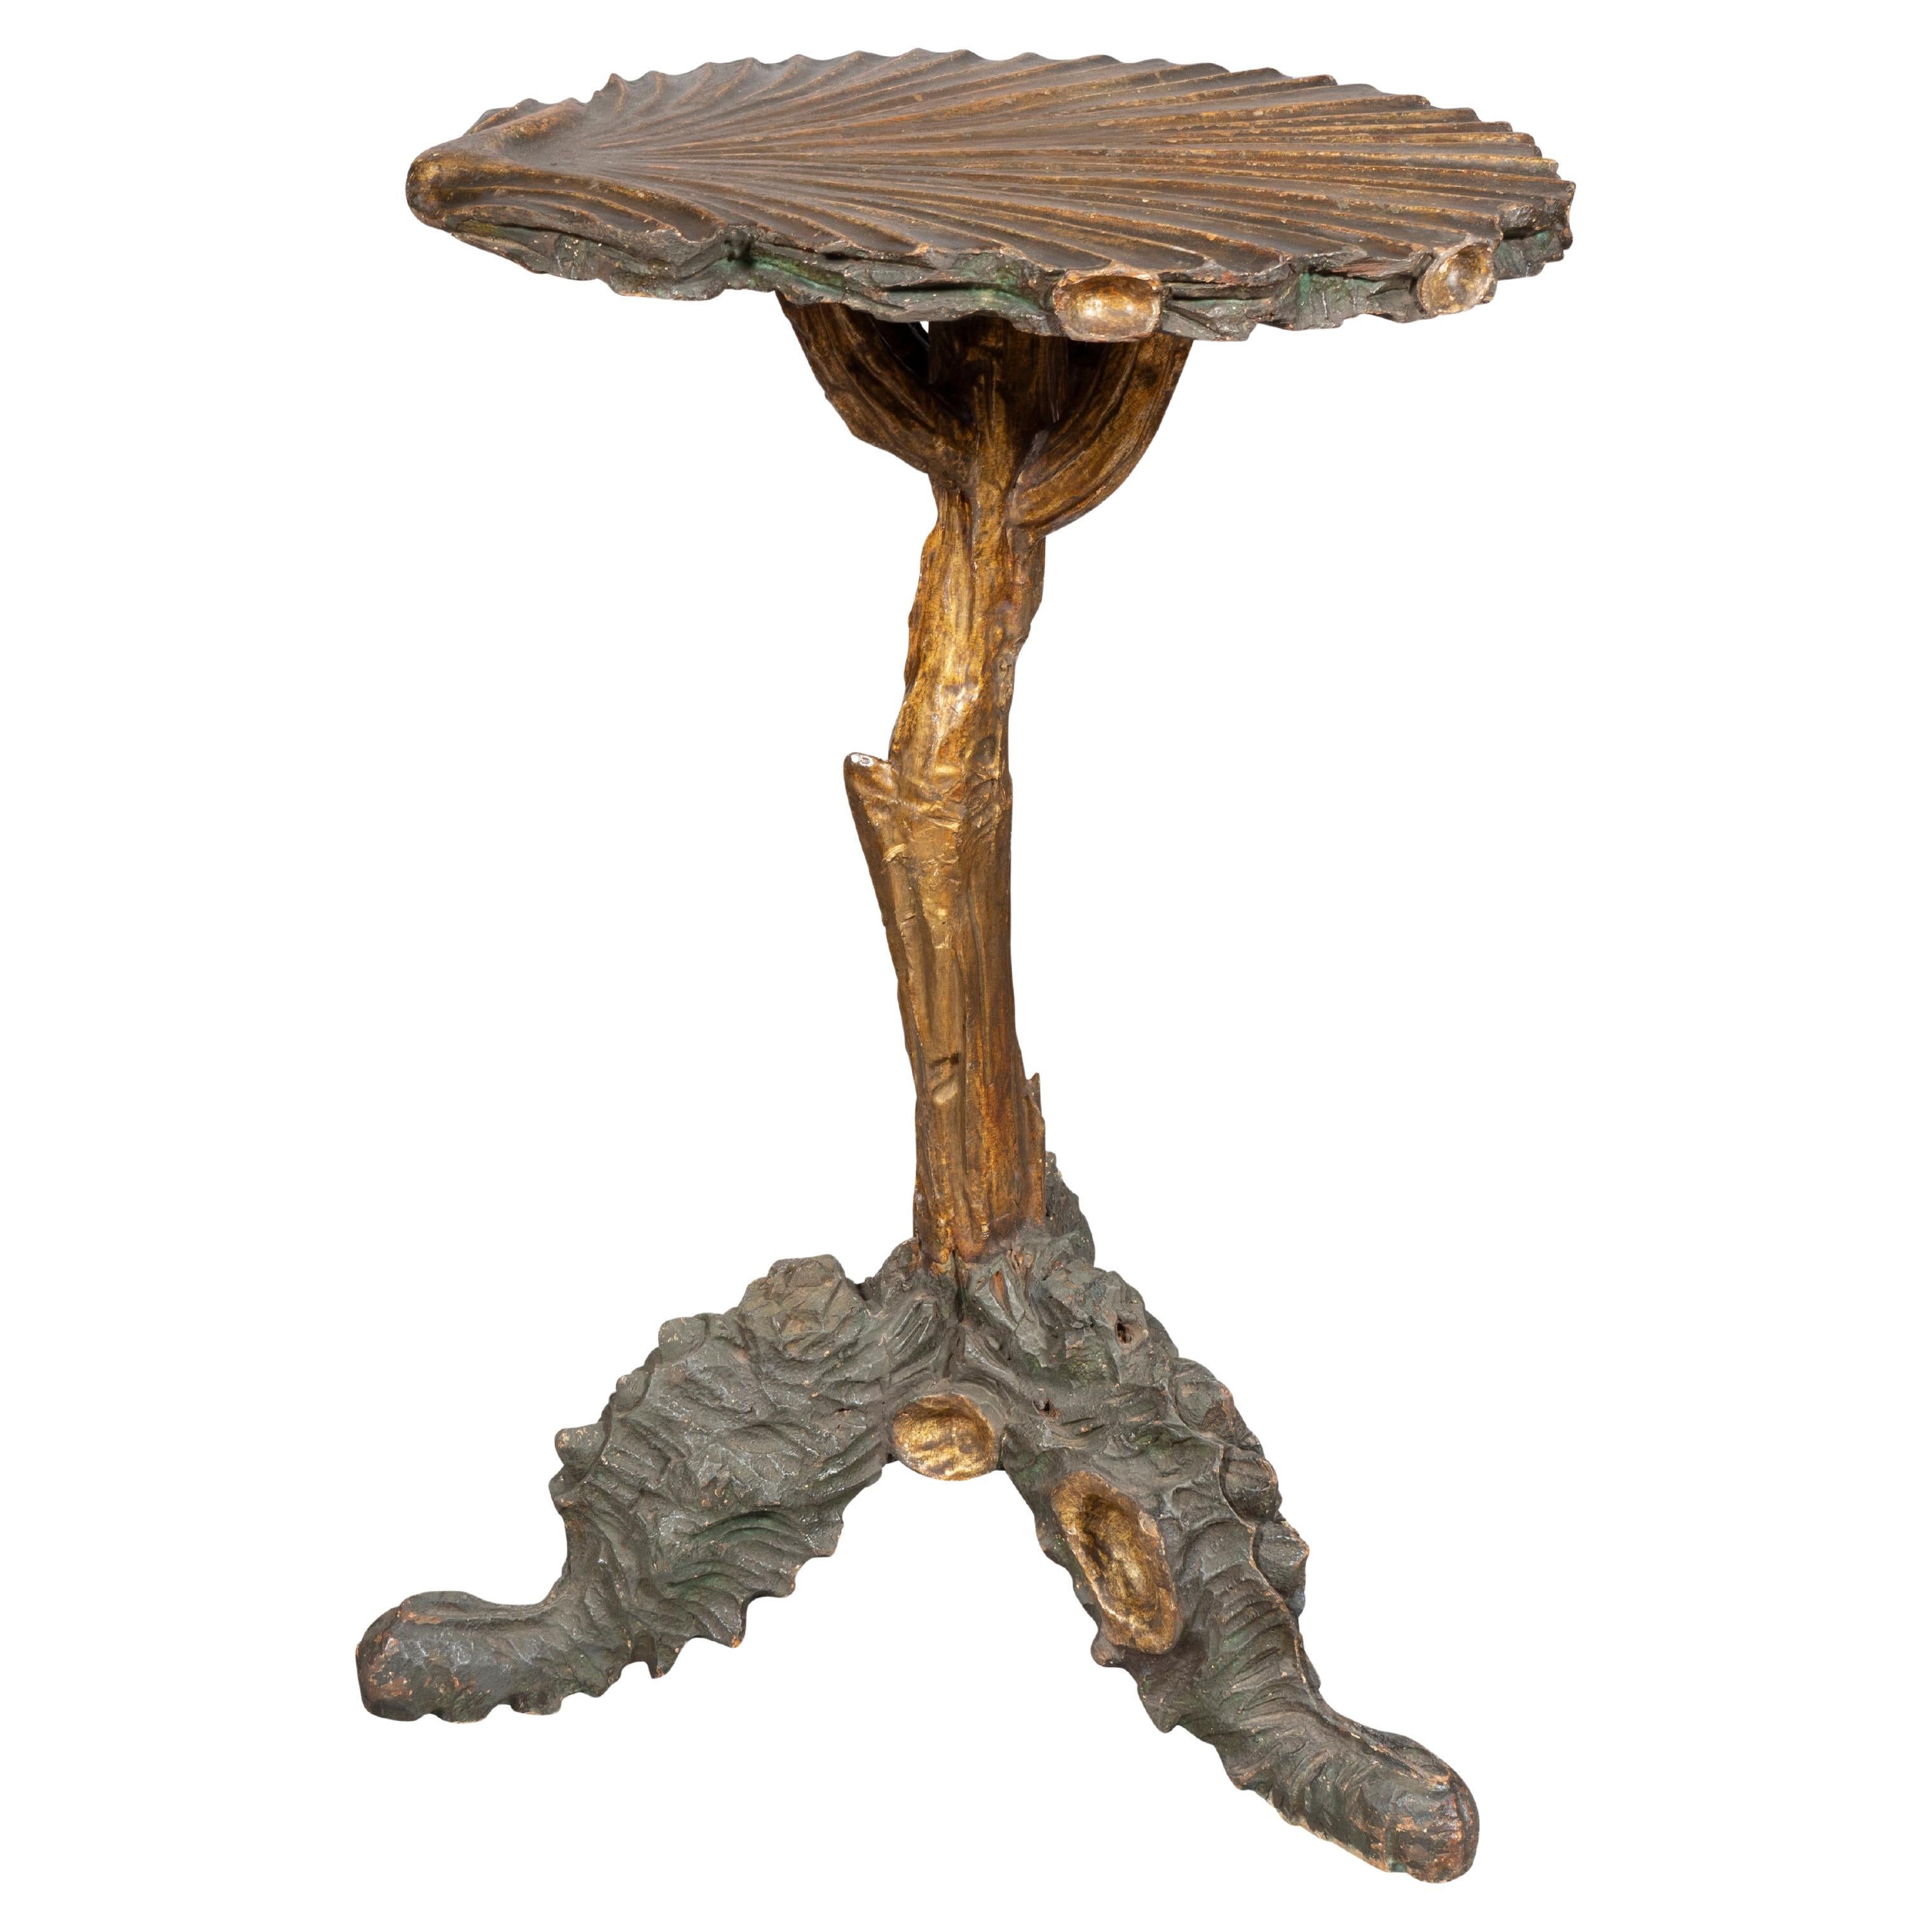 With a scallop shell top and naturalistic tree limb support with coral and oyster shell three part legs.